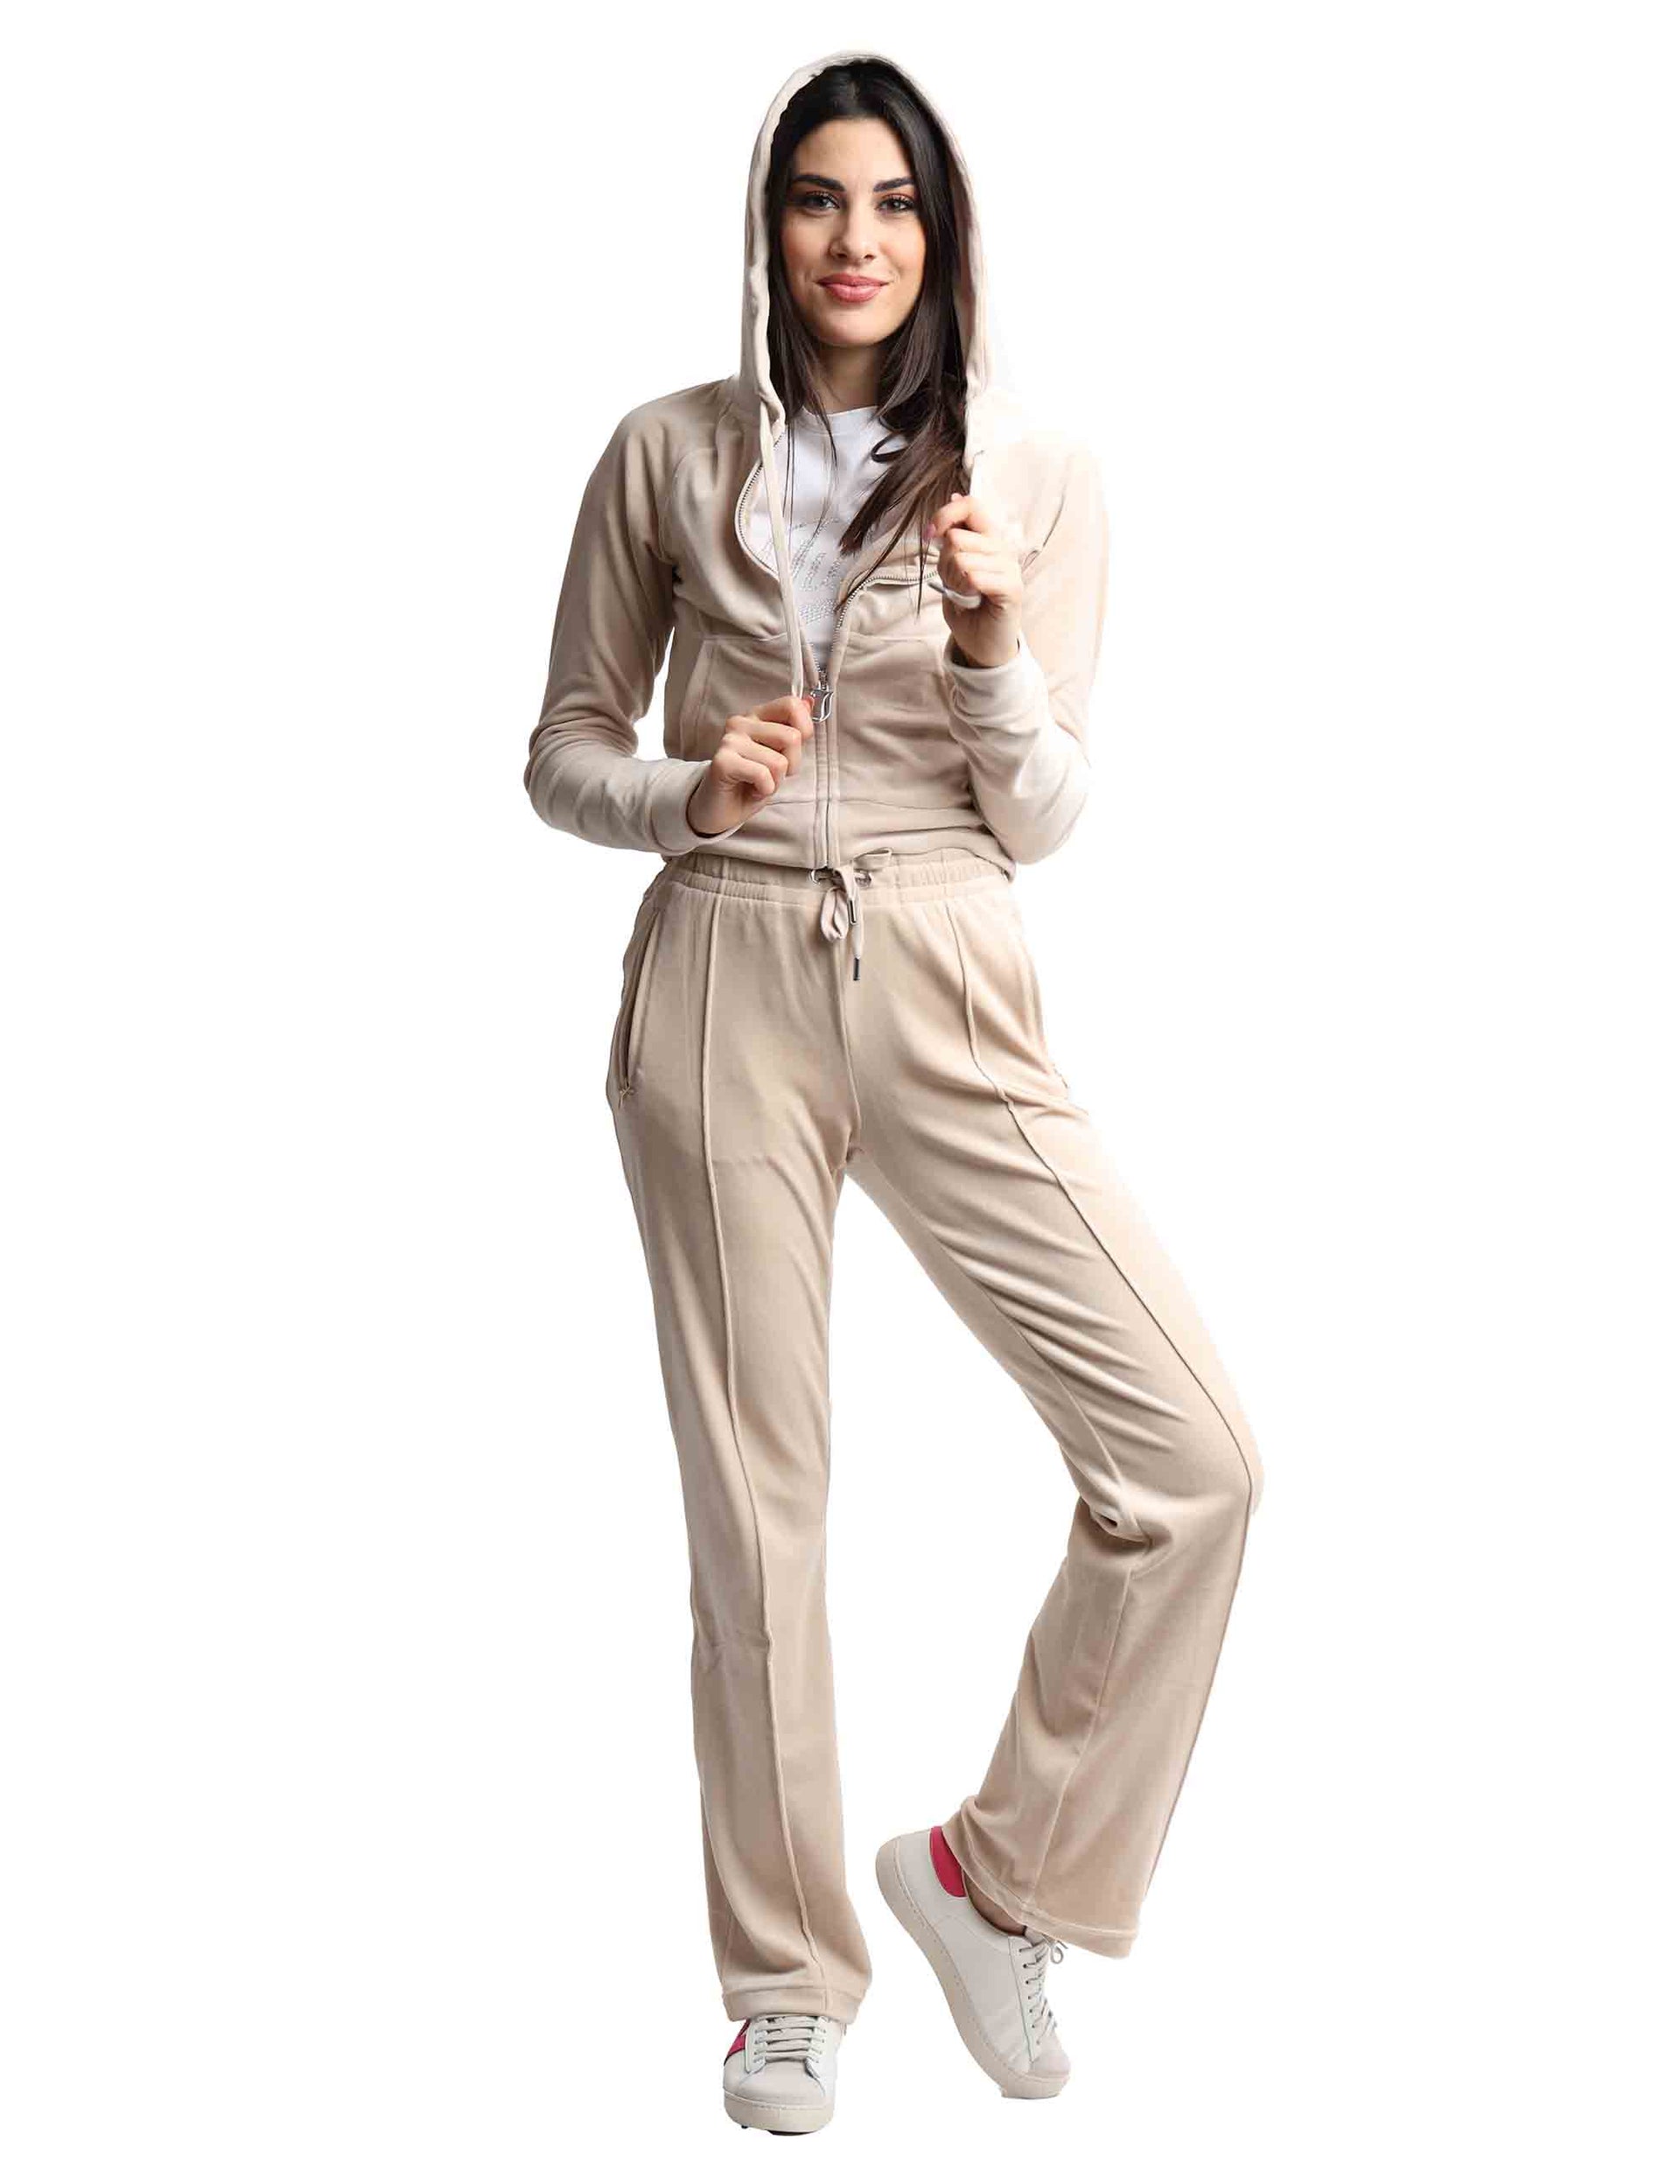 Tina women's tracksuit trousers in beige fabric with rhinestones